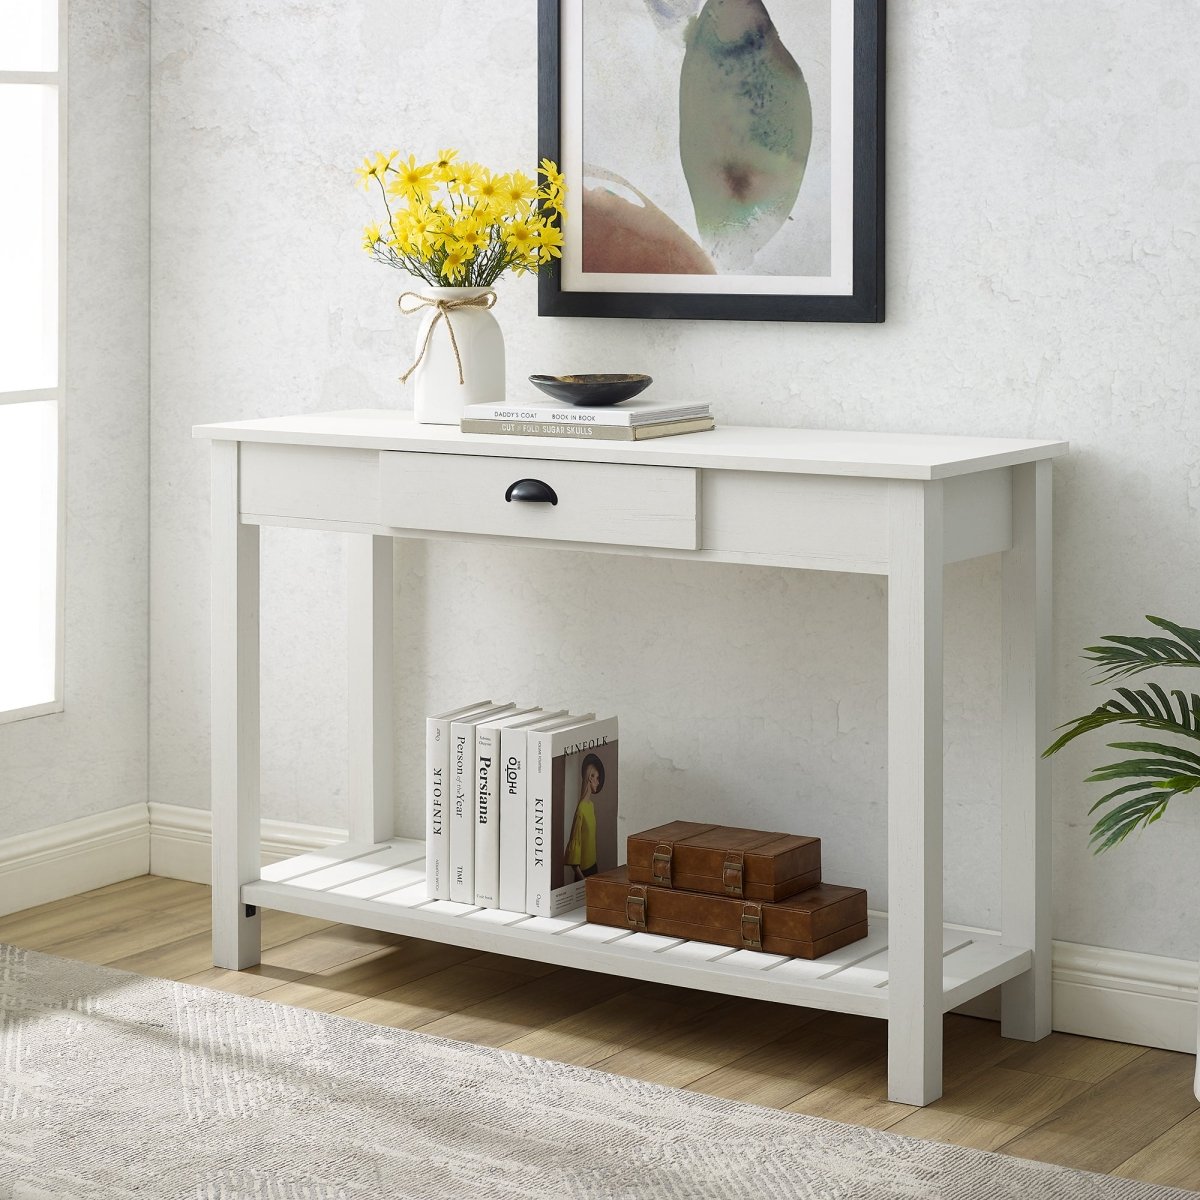 Walker Edison Country Entry Table - lily & onyx